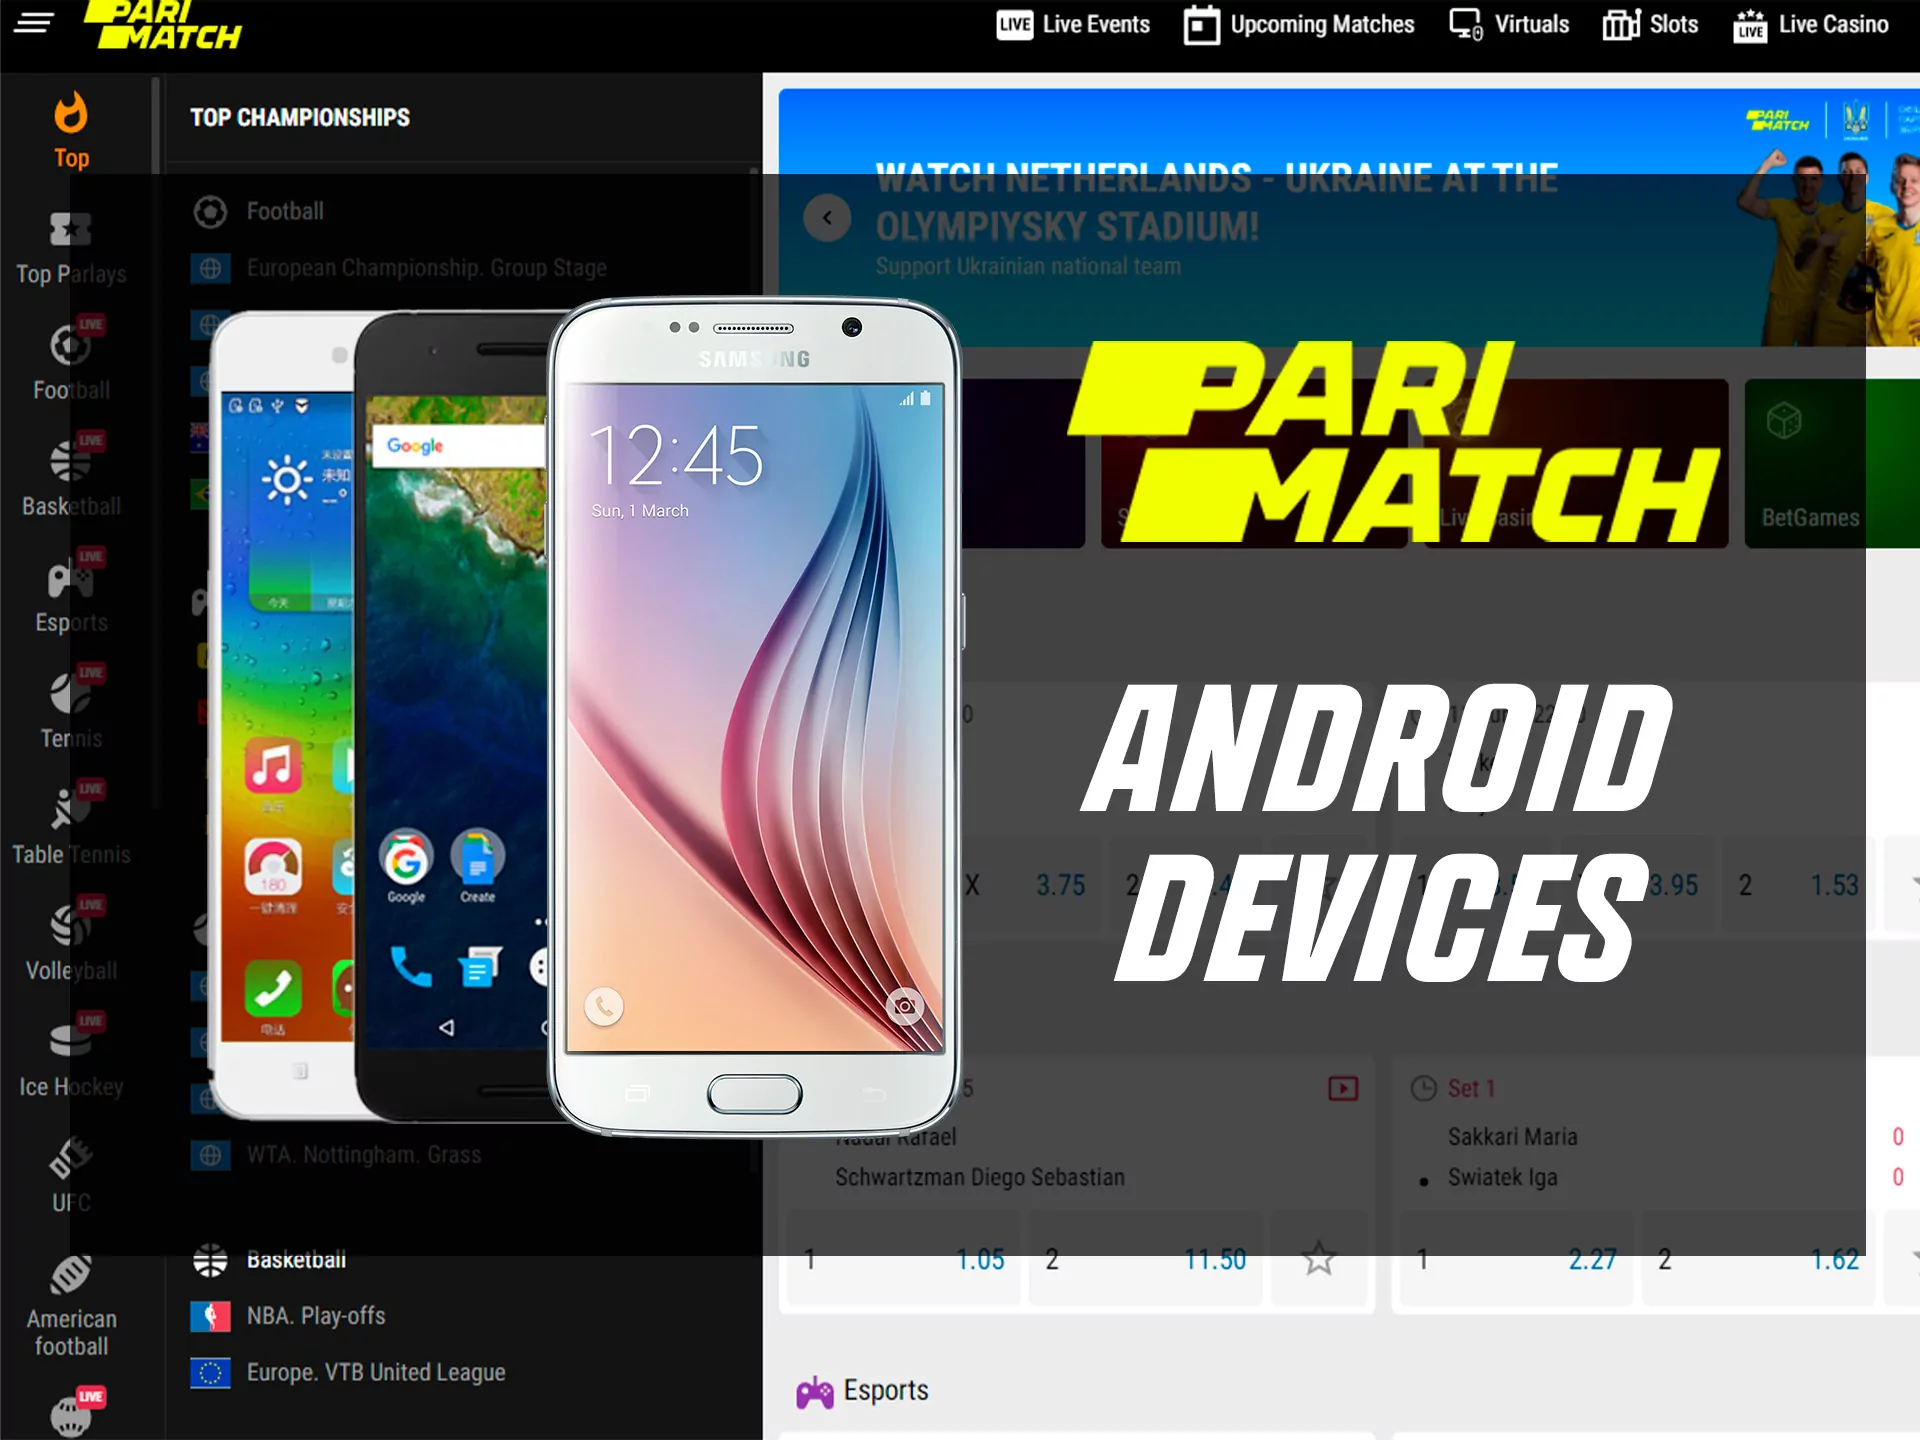 Parimatch App For Android Devices